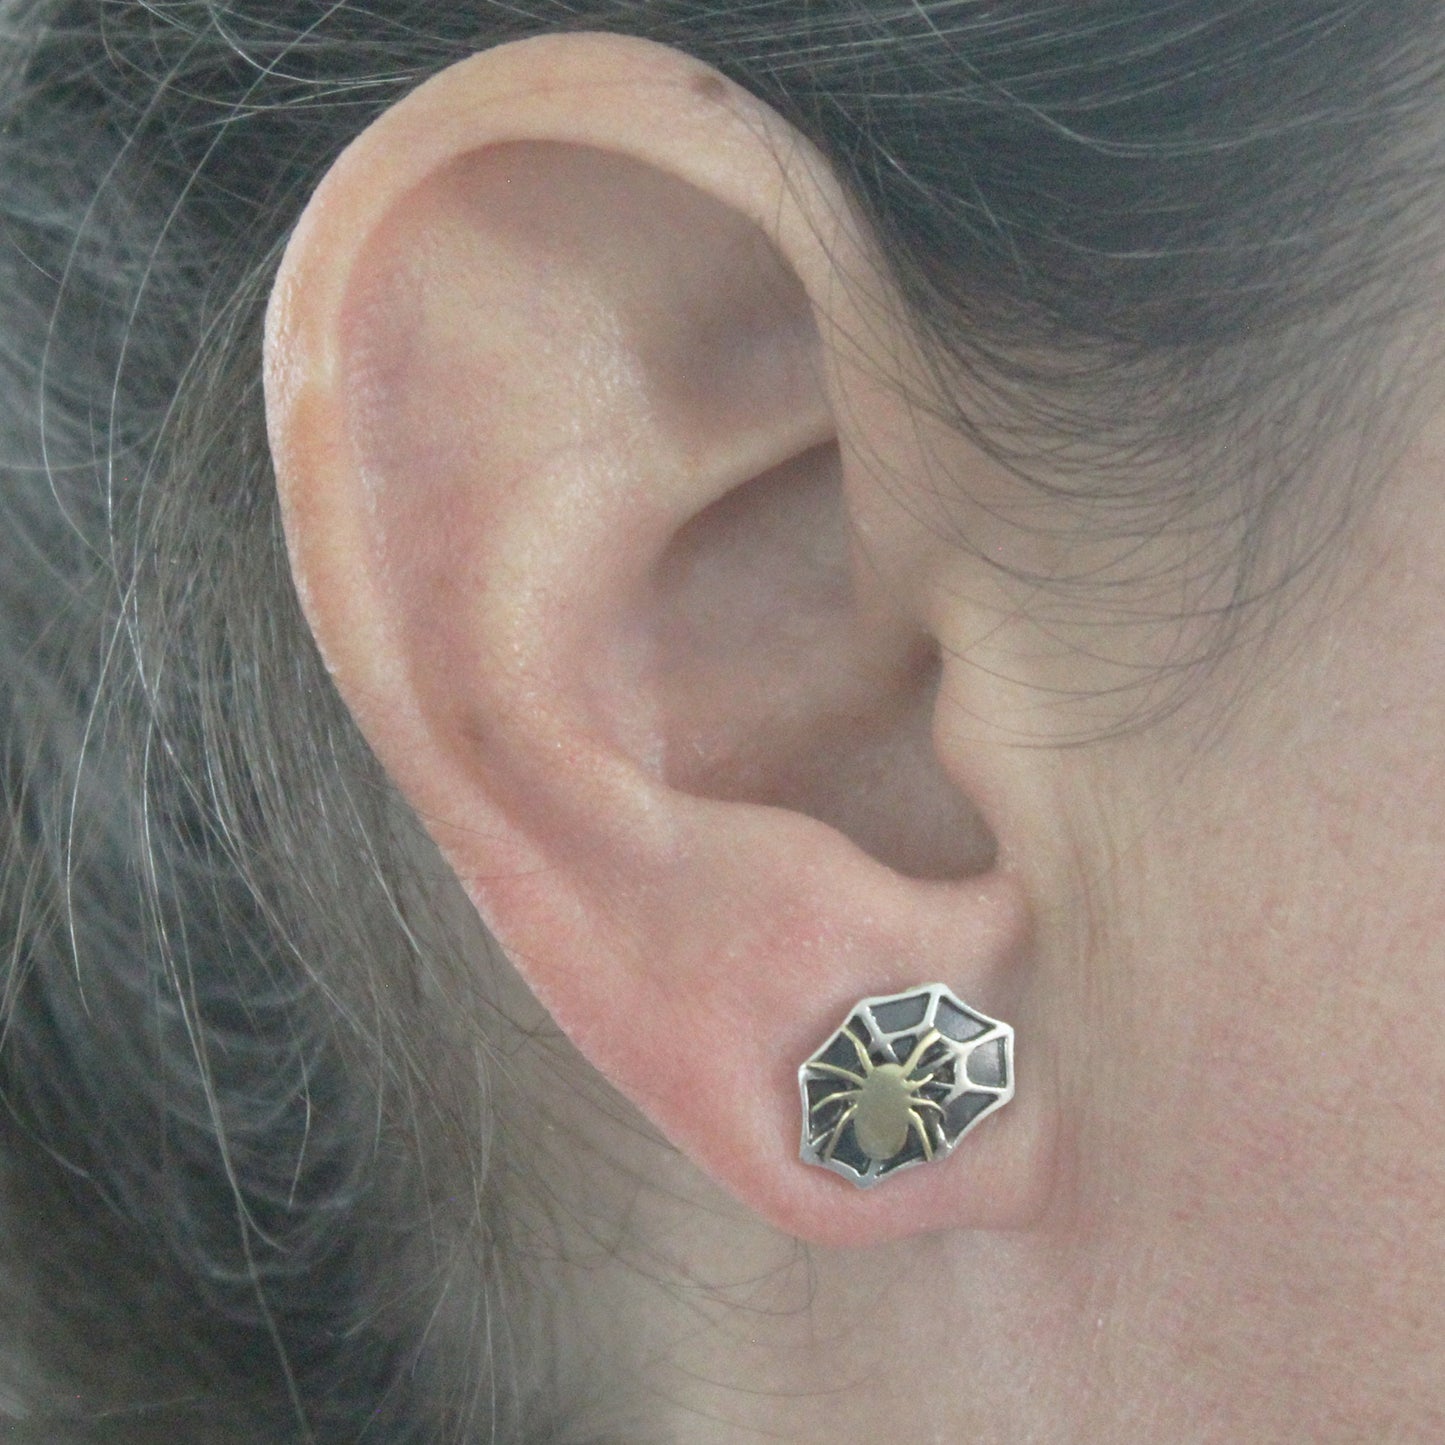 Cobwebs with spider earrings in 925 silver and brass